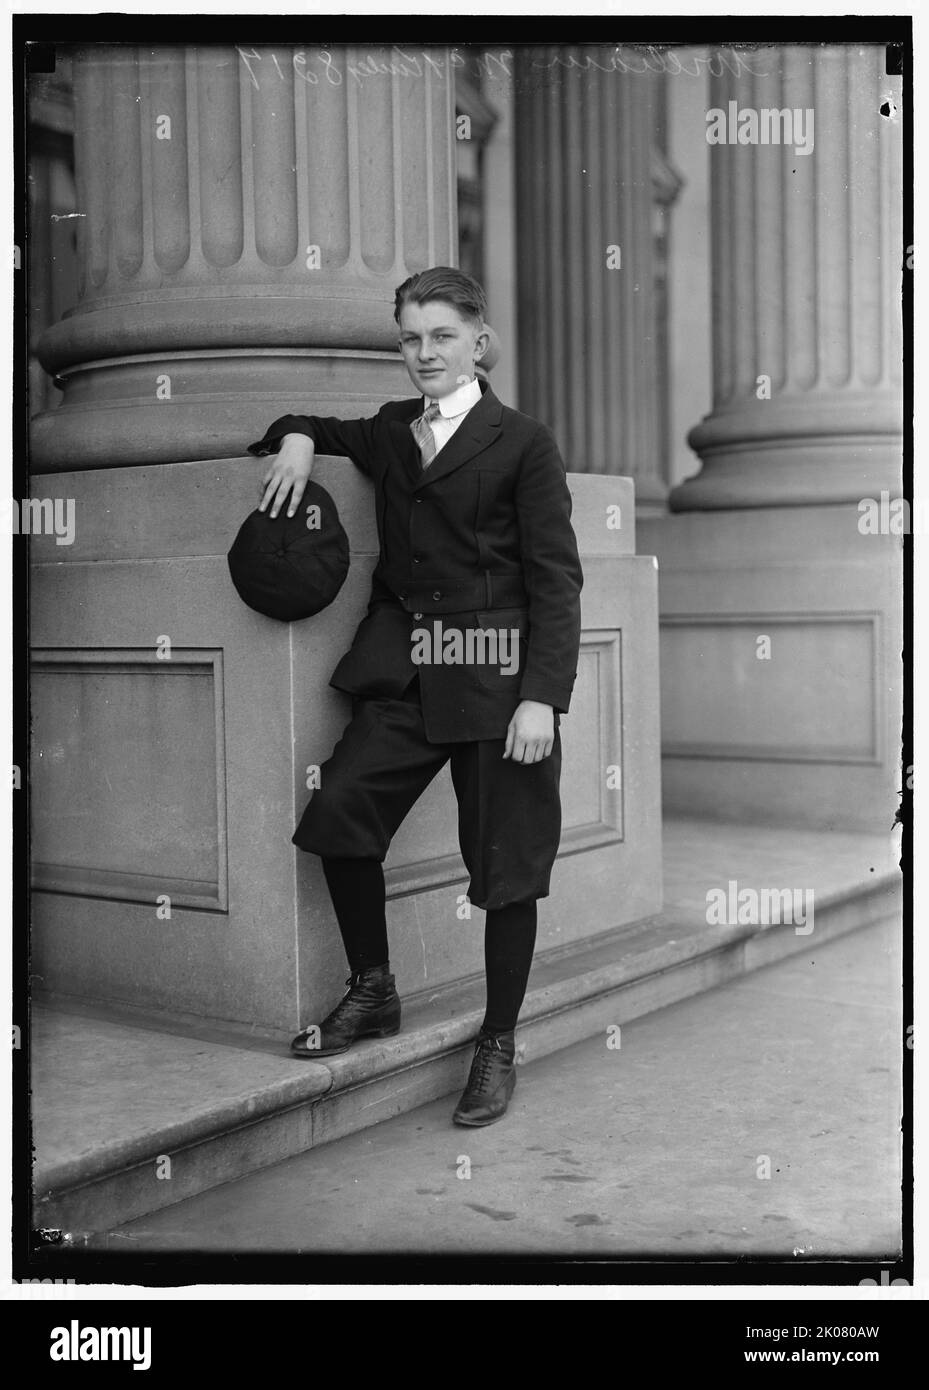 William Mckinely, Senate Page, between 1914 and 1918. Young man in plus-fours, possibly named William Mckinely, or served as a page during the administration of President William McKinley? Stock Photo